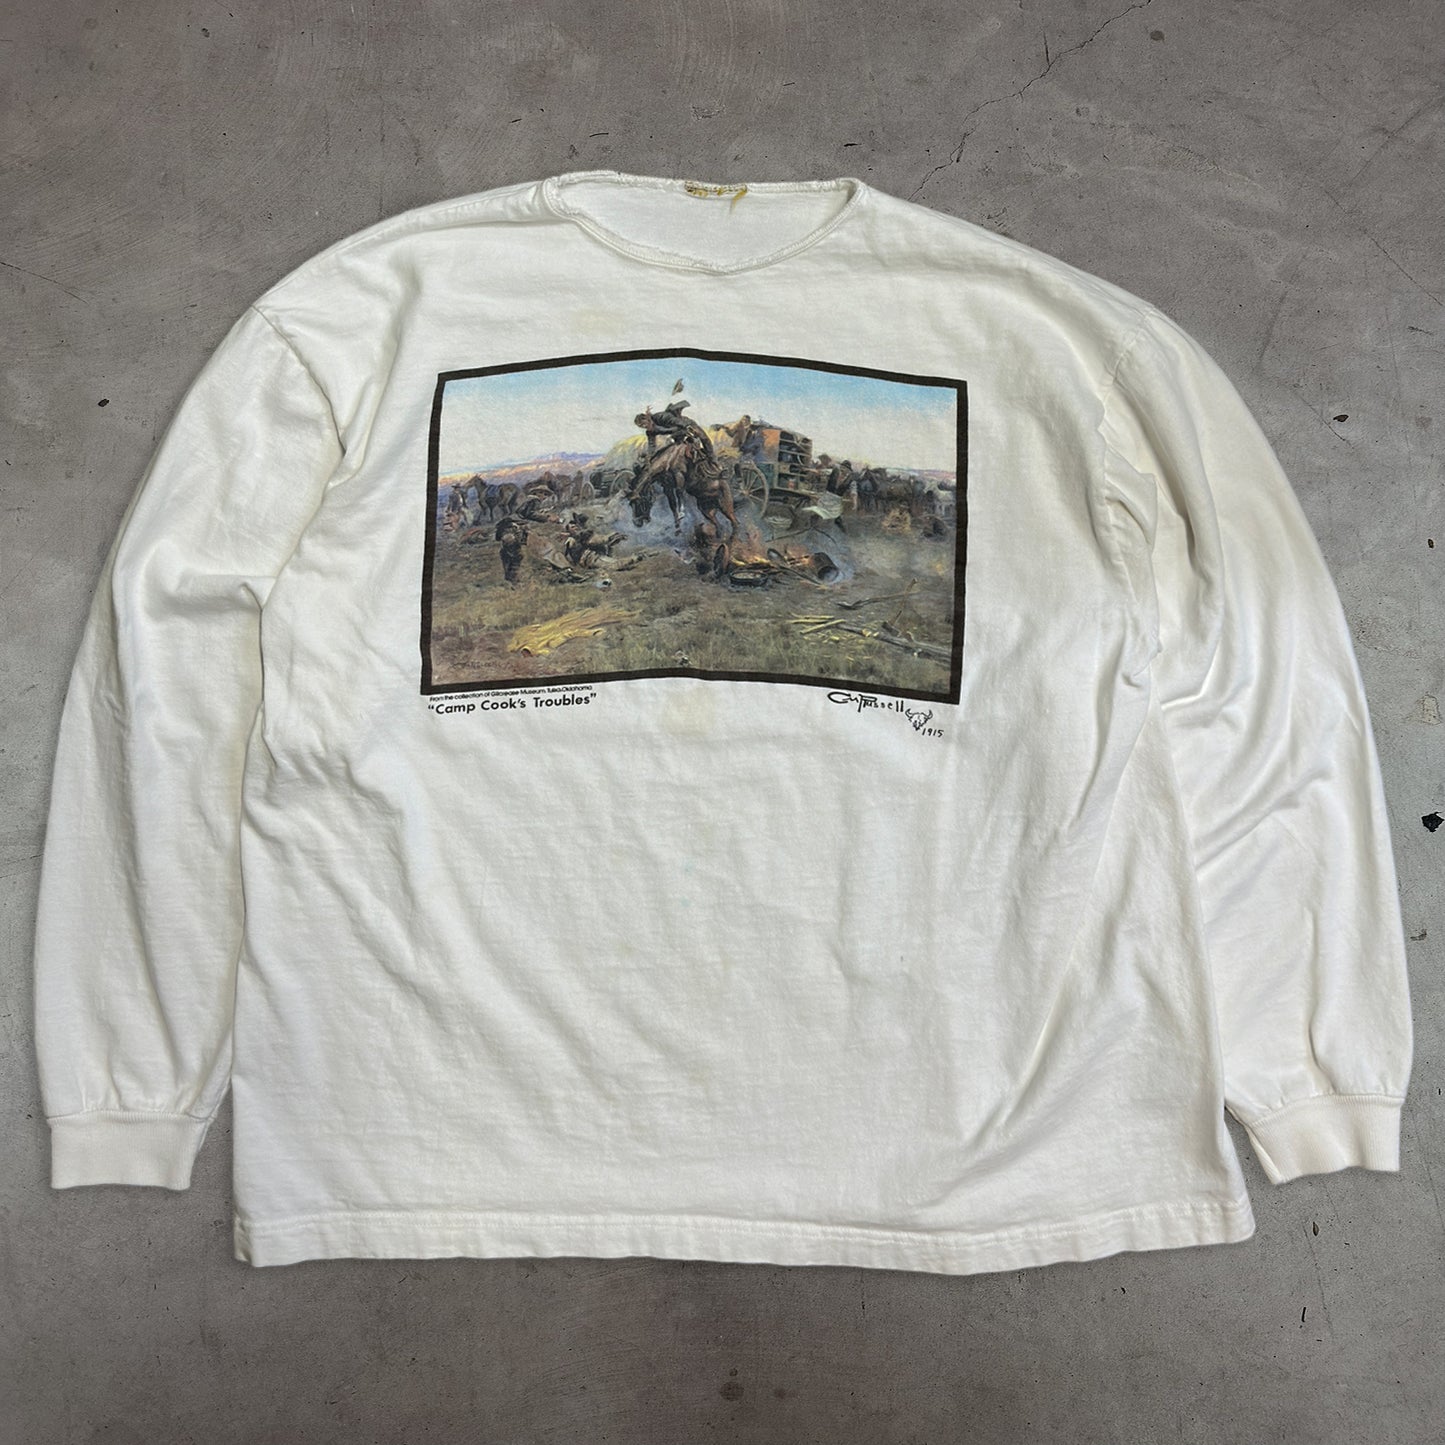 1990S "CAMP COOK'S TROUBLES" LONGSLEEVE TEE / LARGE